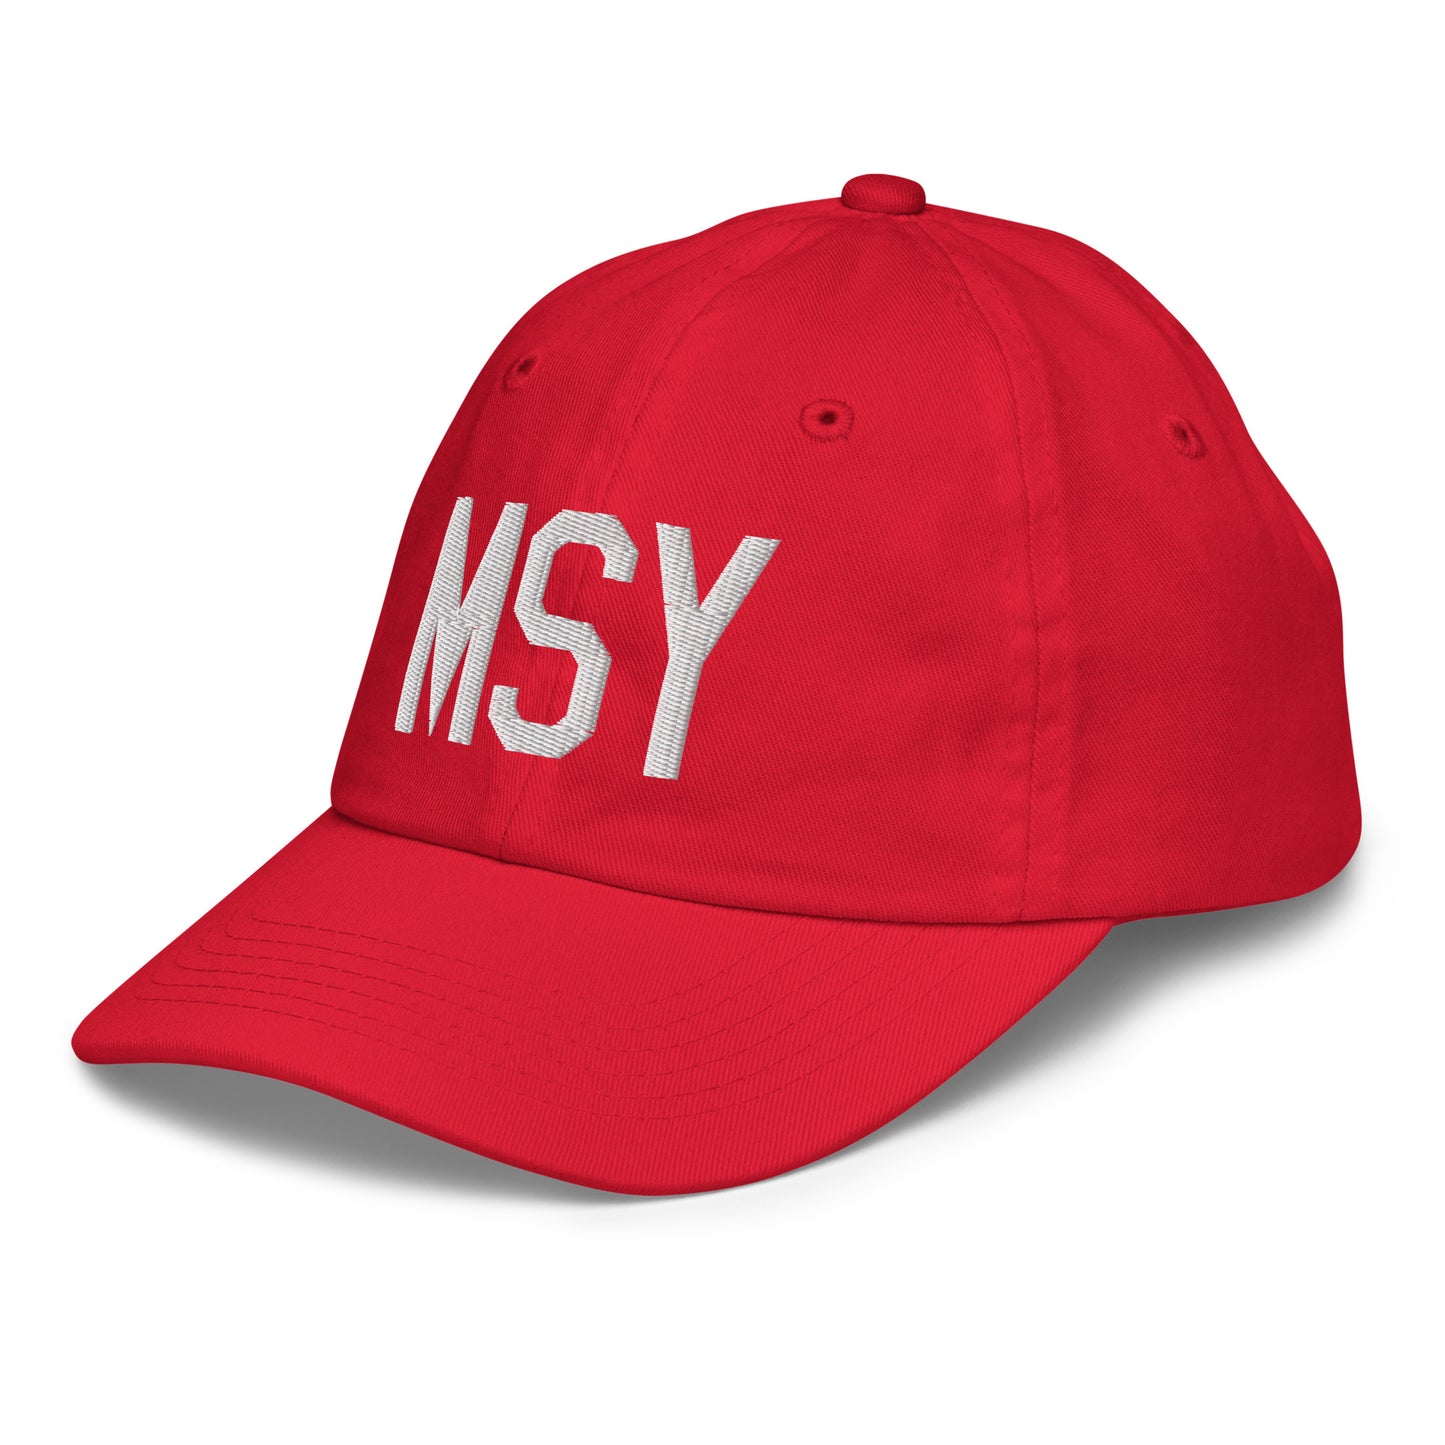 Airport Code Kid's Baseball Cap - White • MSY New Orleans • YHM Designs - Image 19